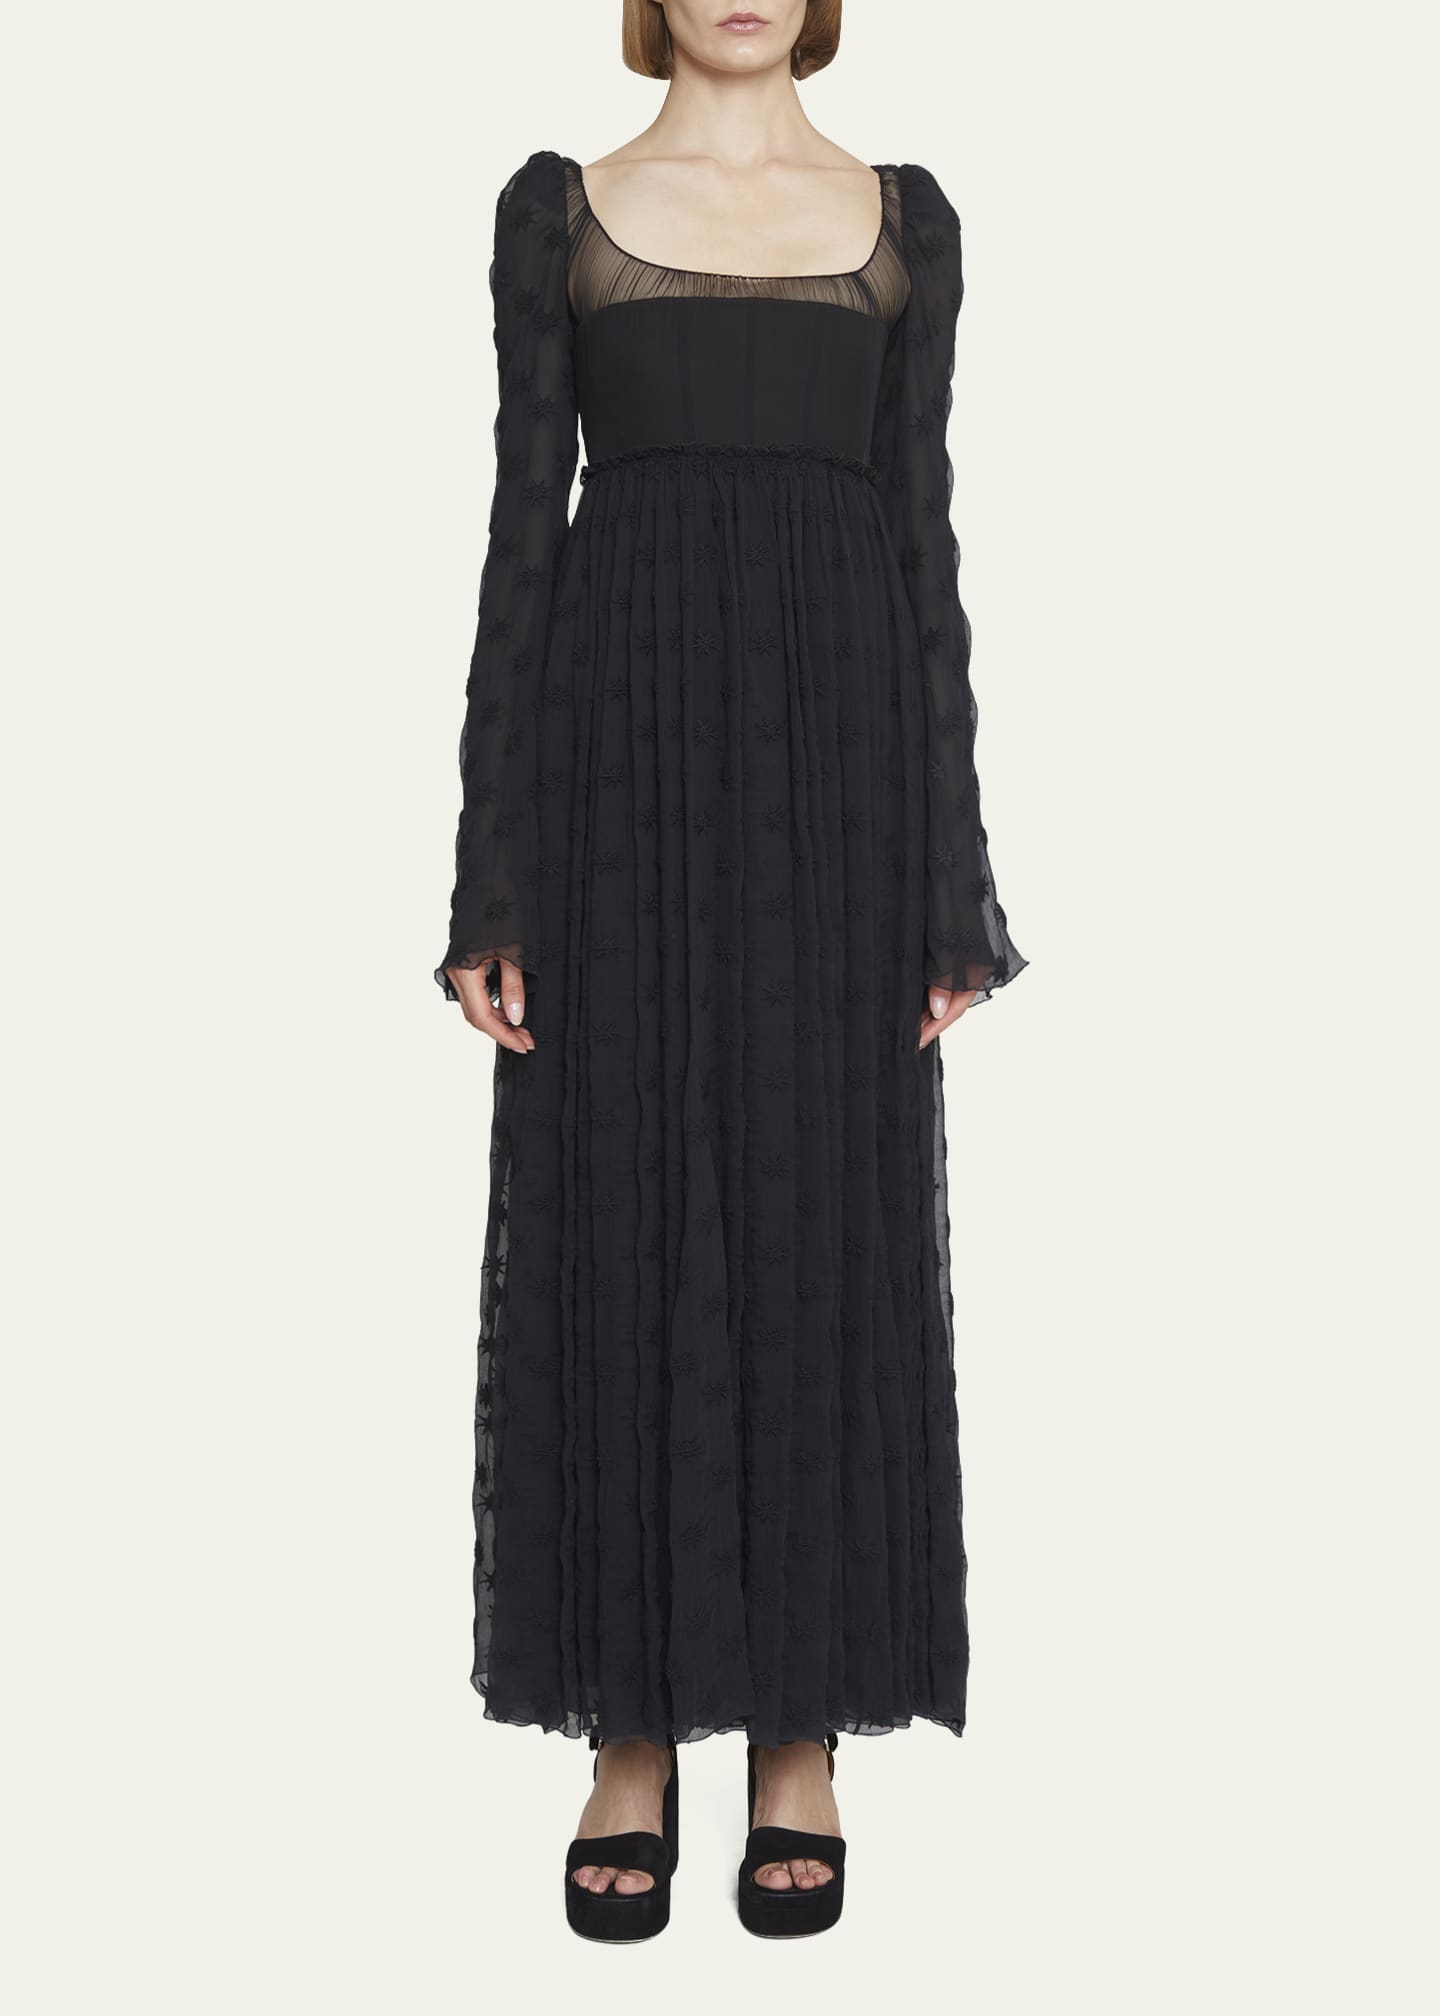 Chloe Semi-Sheer Maxi Dress with Embroidered Star Details - Bergdorf ...